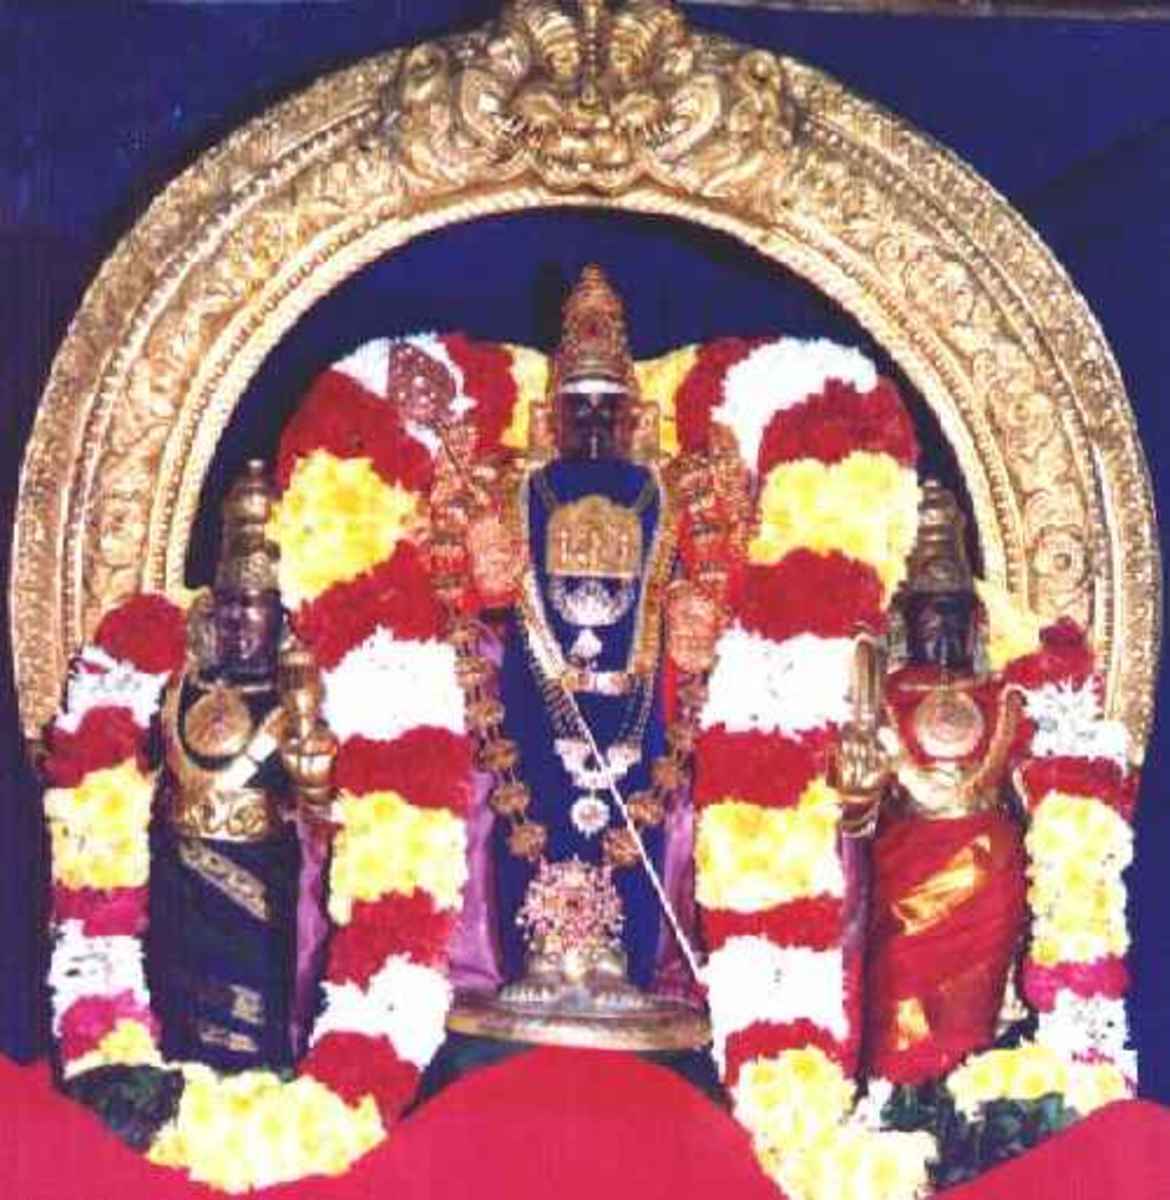 lord-muruga-and-his-six-abodes-in-tamil-nadu--india